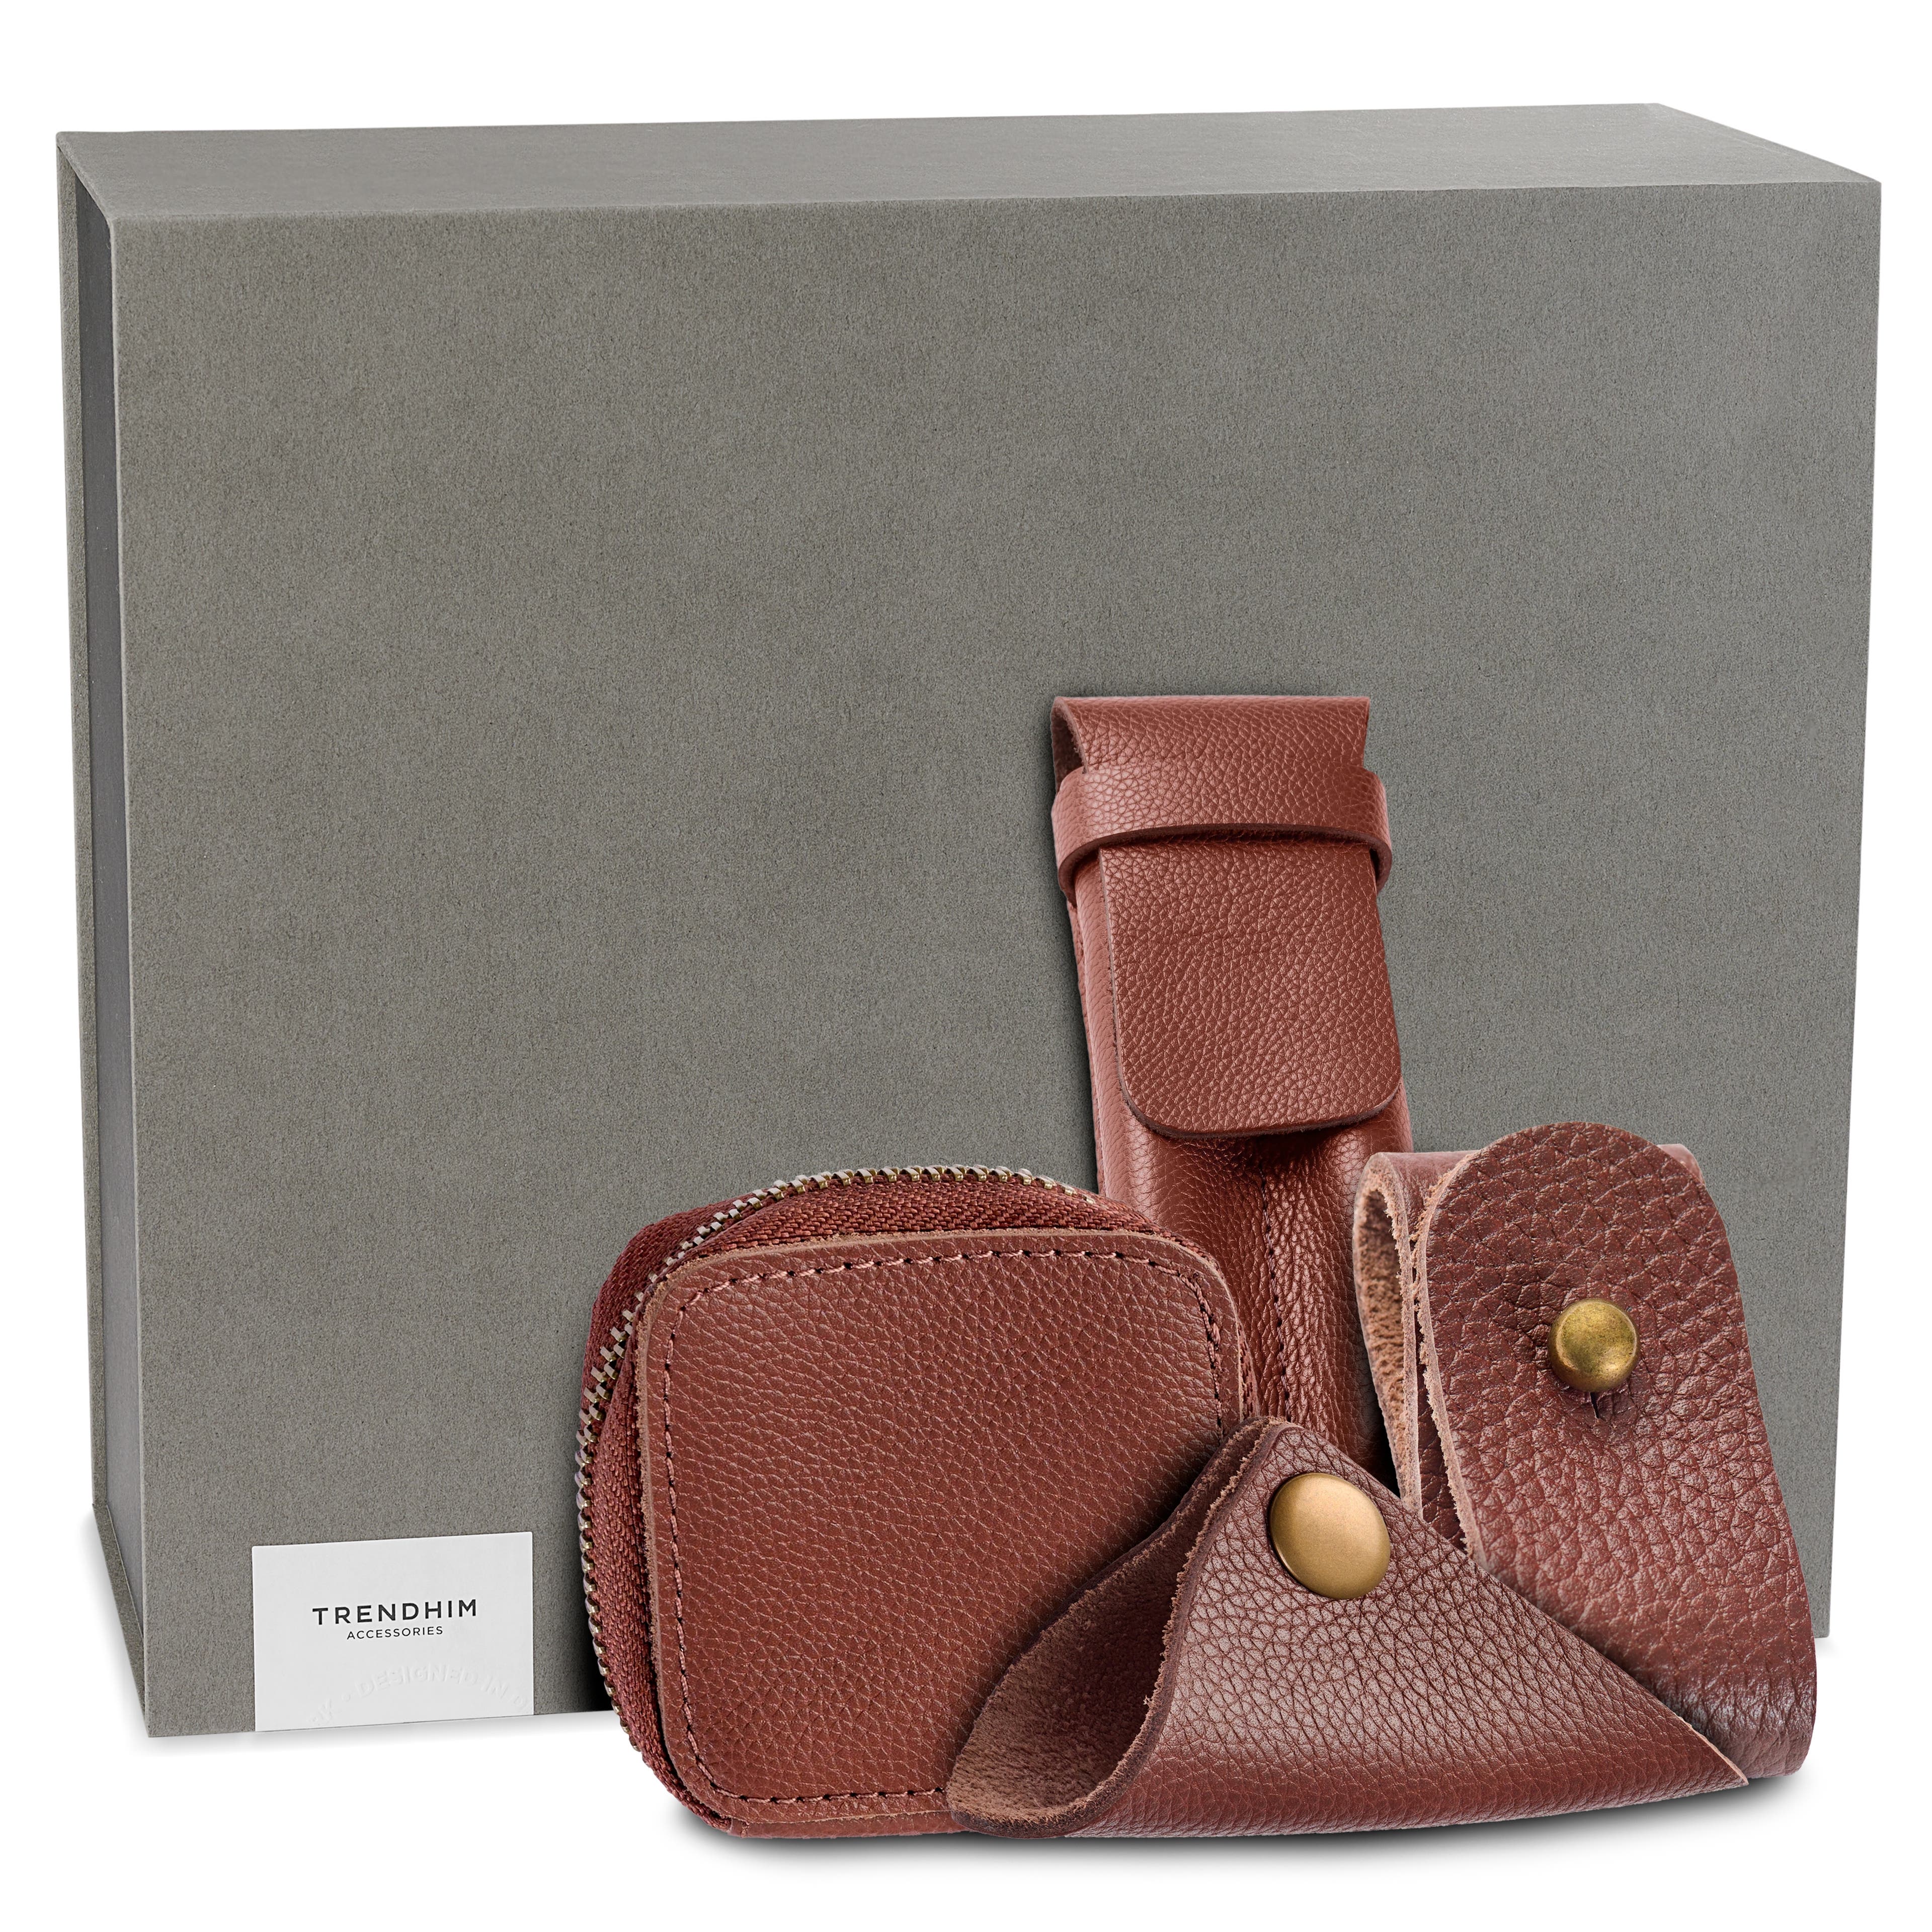 Deluxe Professional Organiser Gift Box | Brown Leather